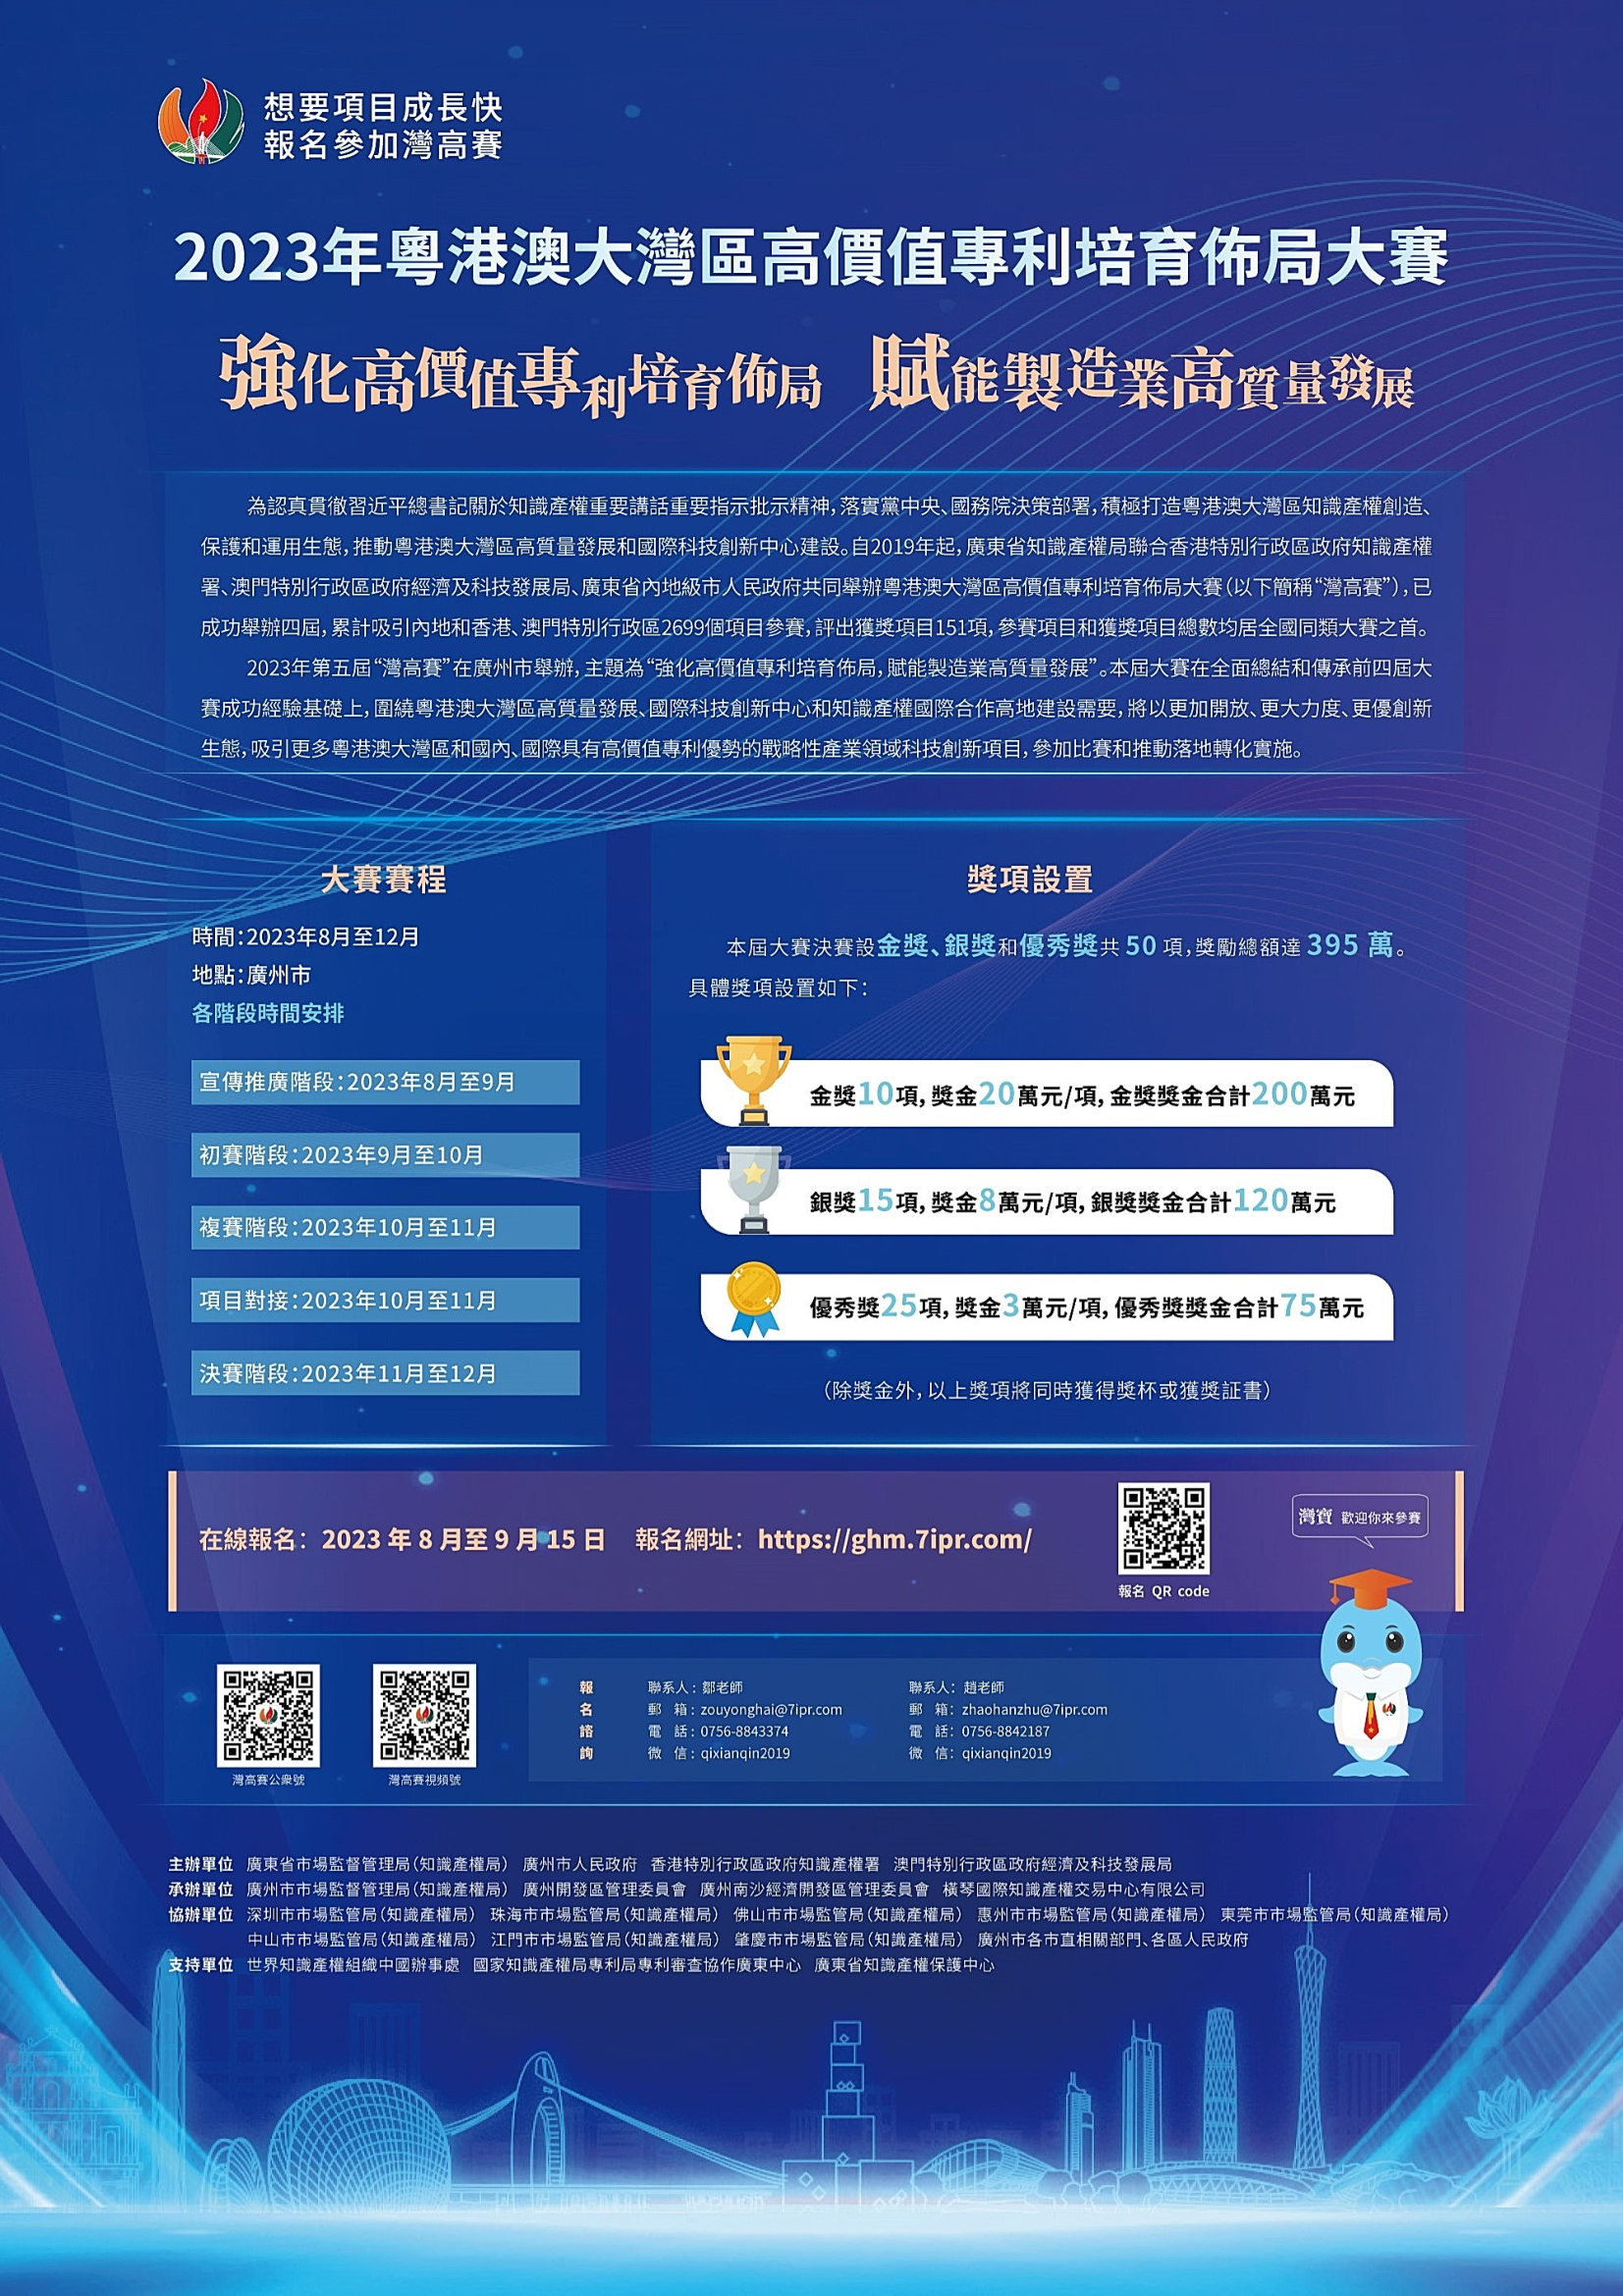 Guangdong-Hong Kong-Macao Greater Bay Area High-value Patent Portfolio Layout Competition 2023